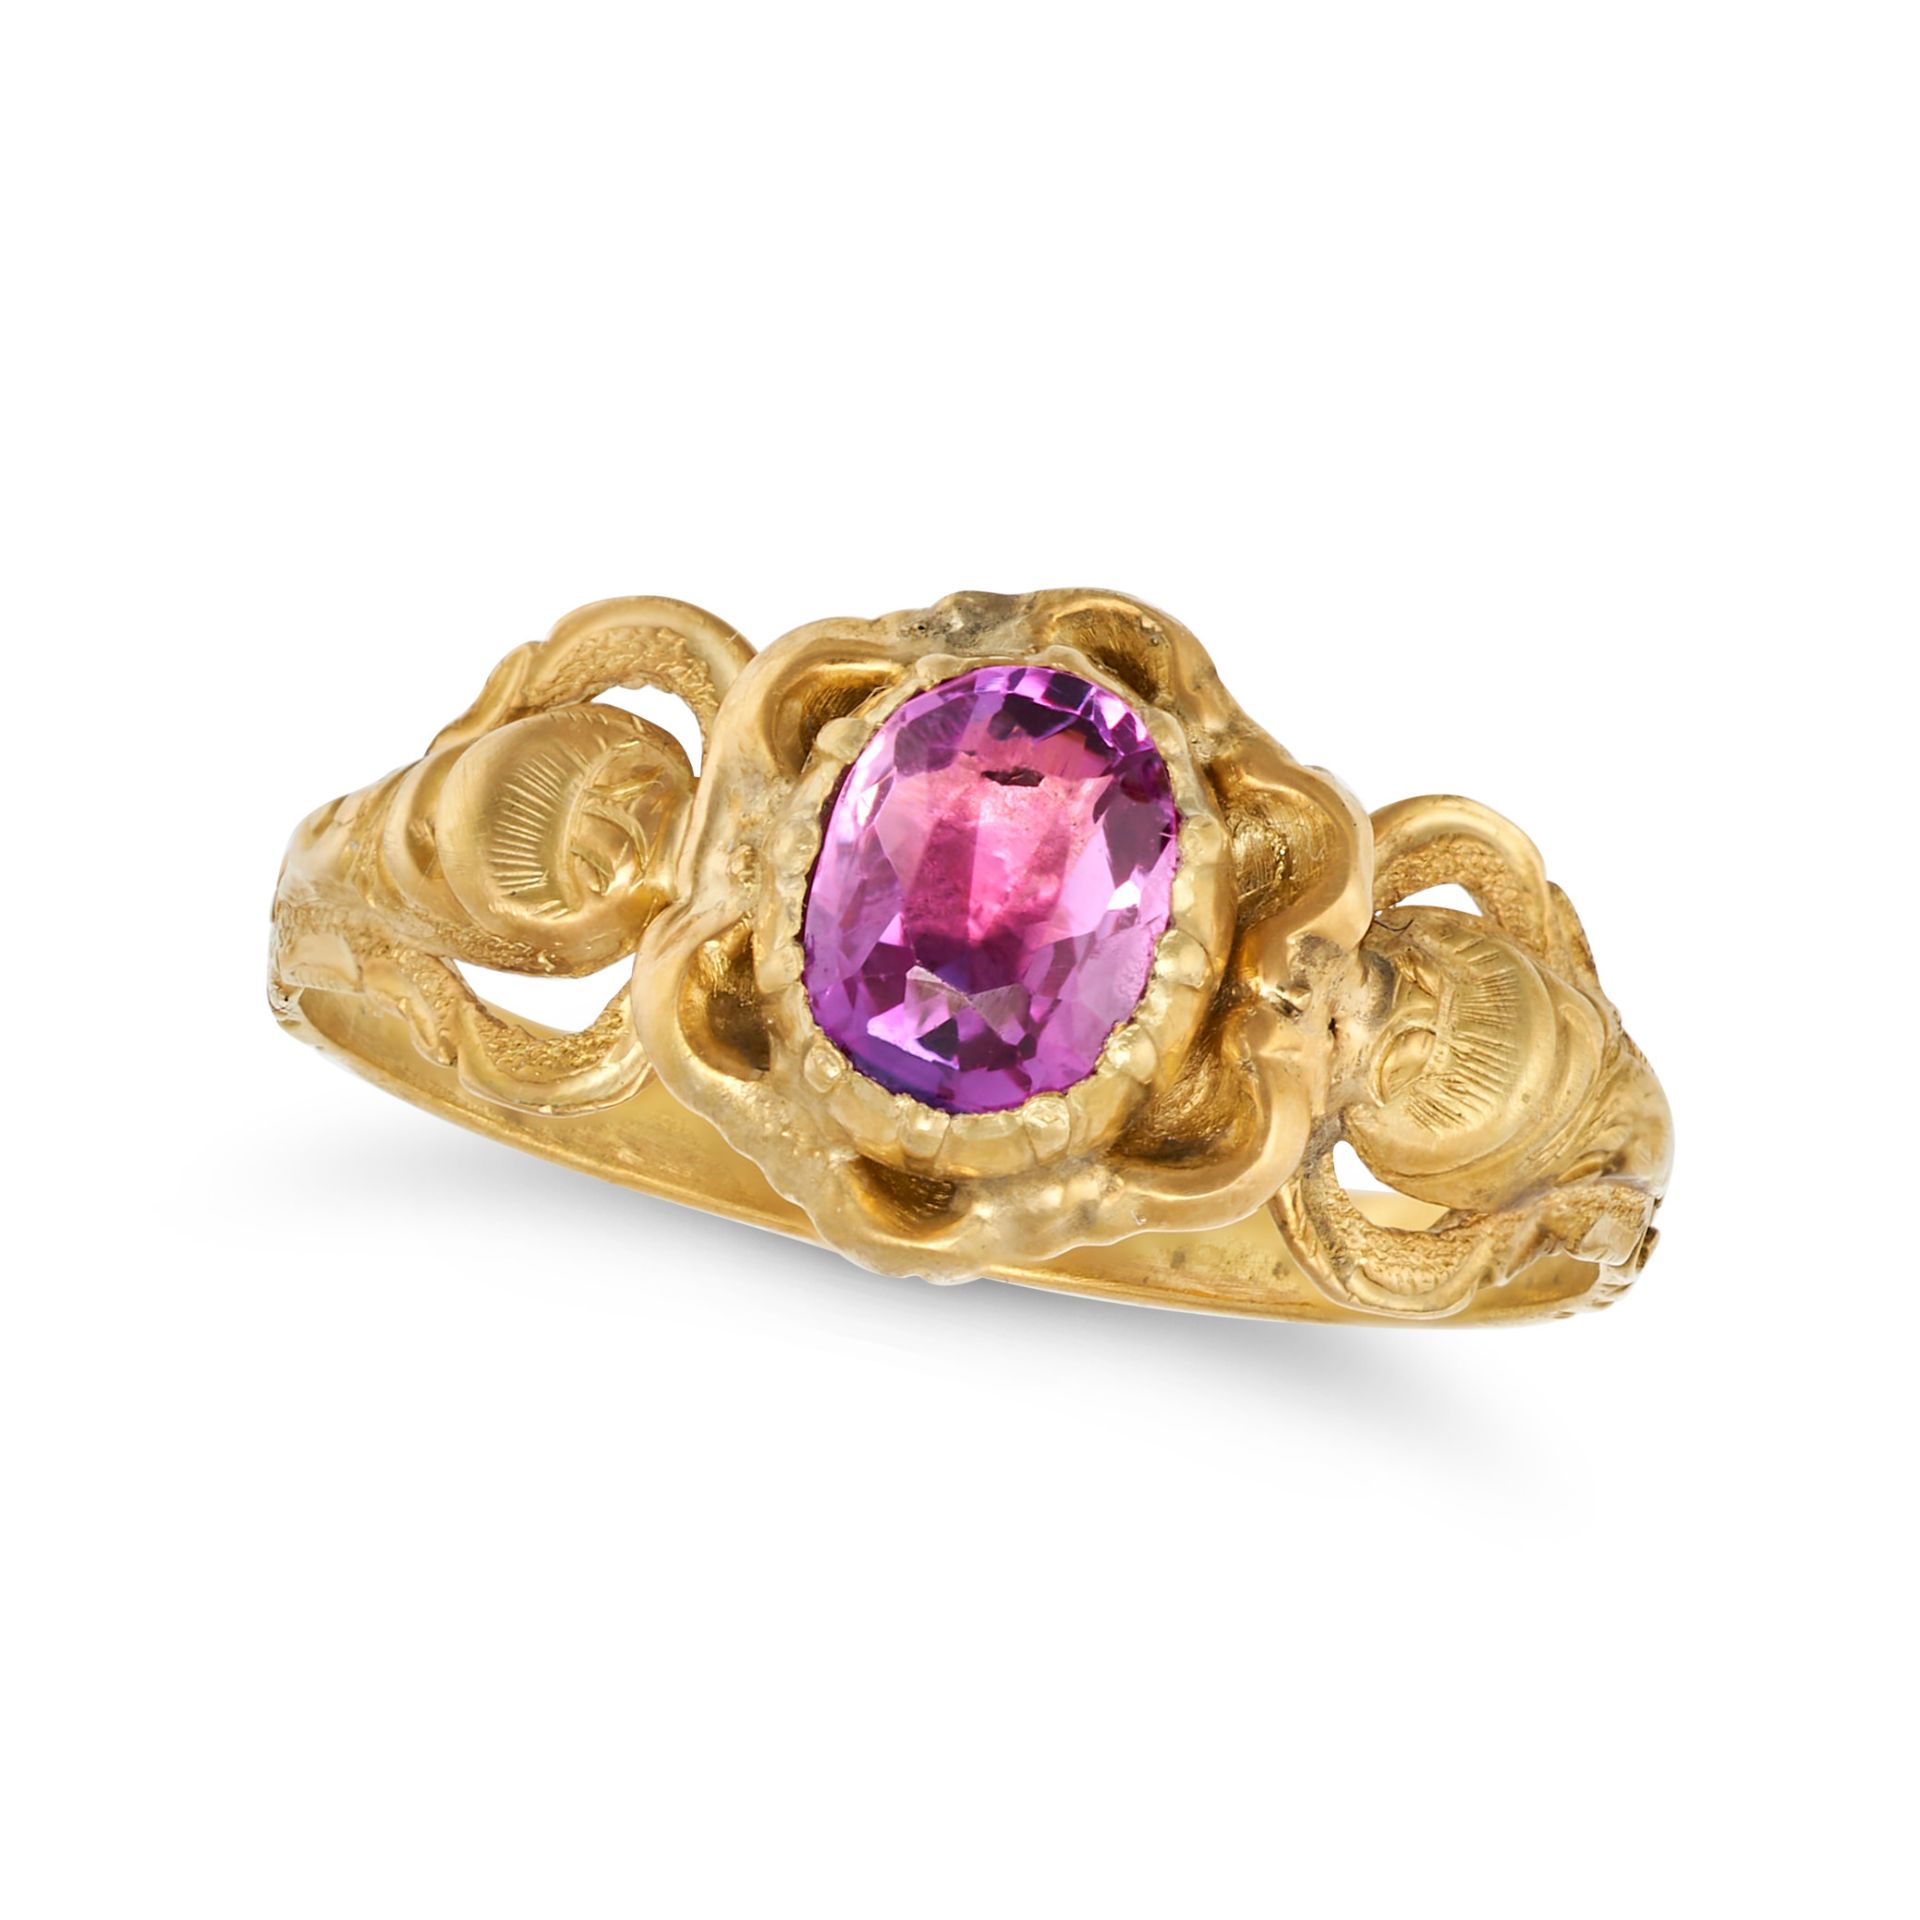 AN ANTIQUE PINK SAPPHIRE RING in yellow gold, the ornate band set with an oval cut pink sapphire,...